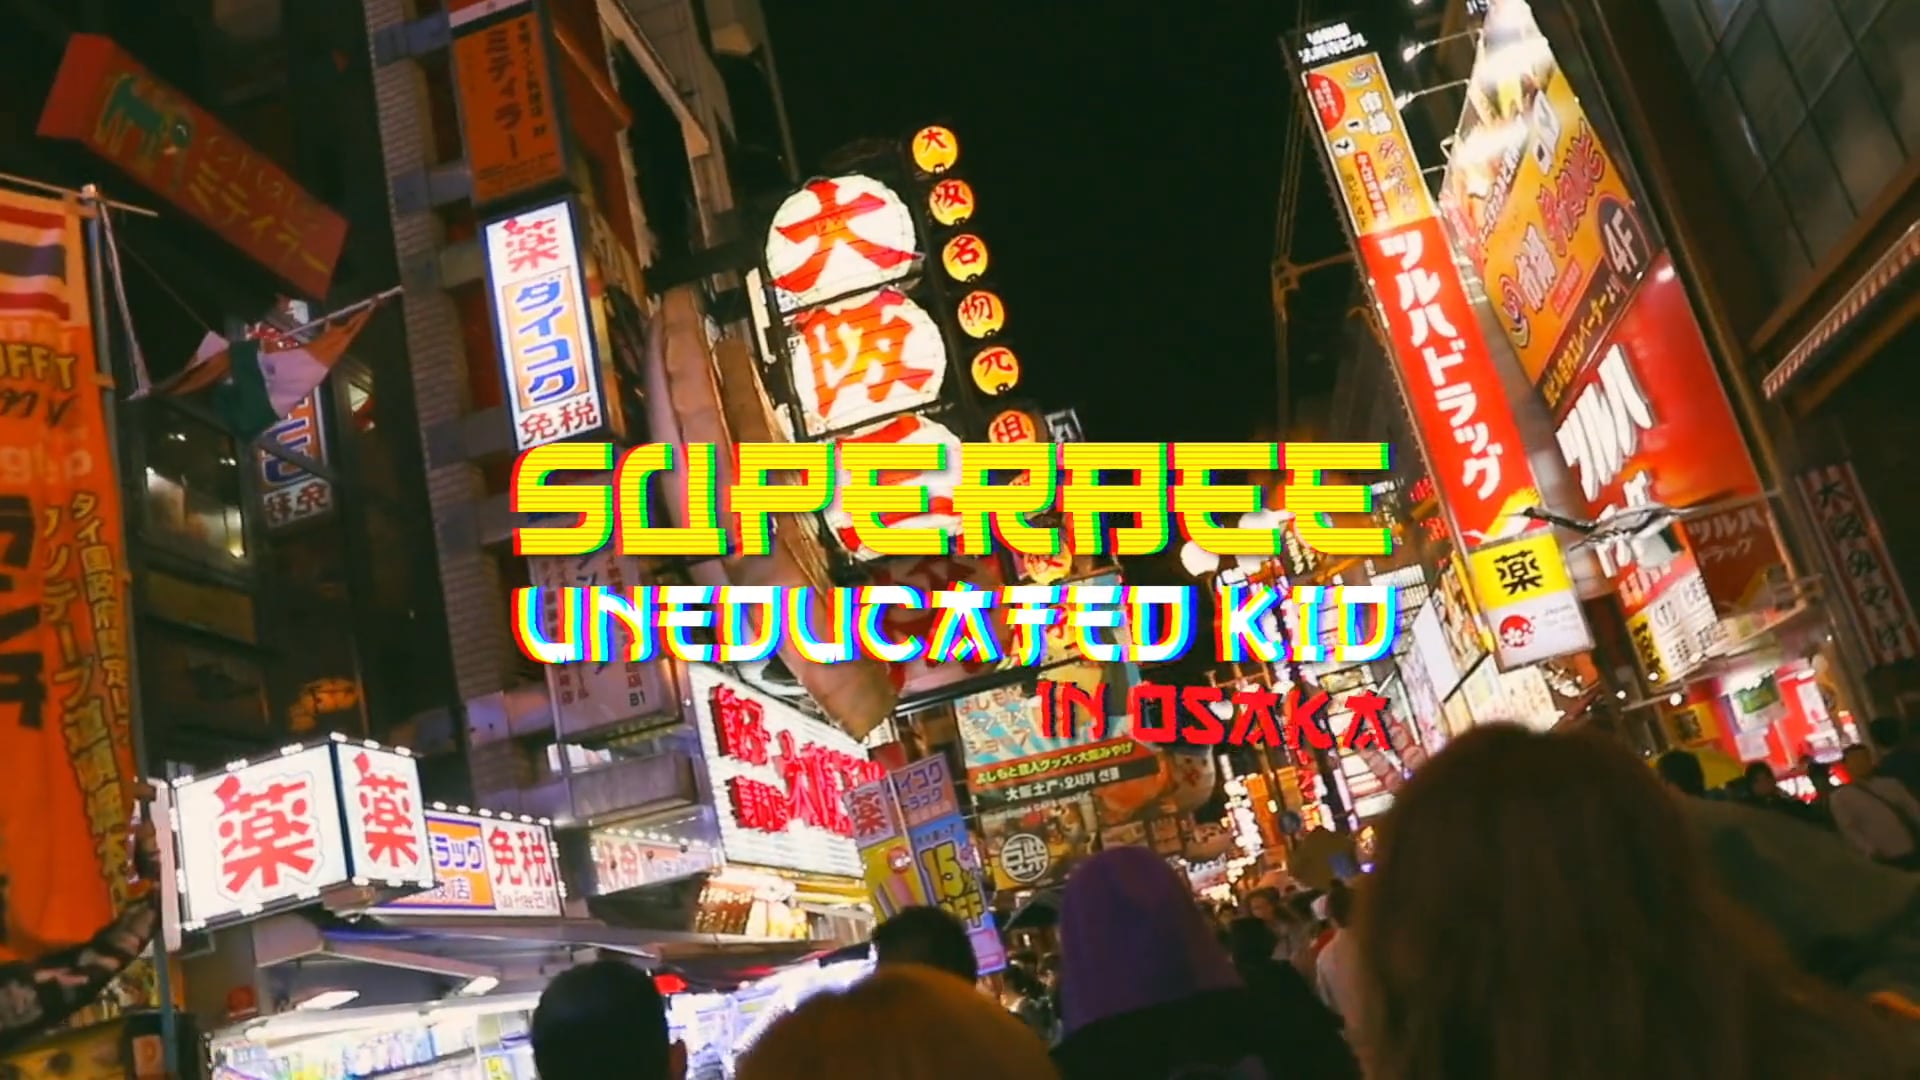 SUPERBEE UNEDUCATED KID in OSAKA